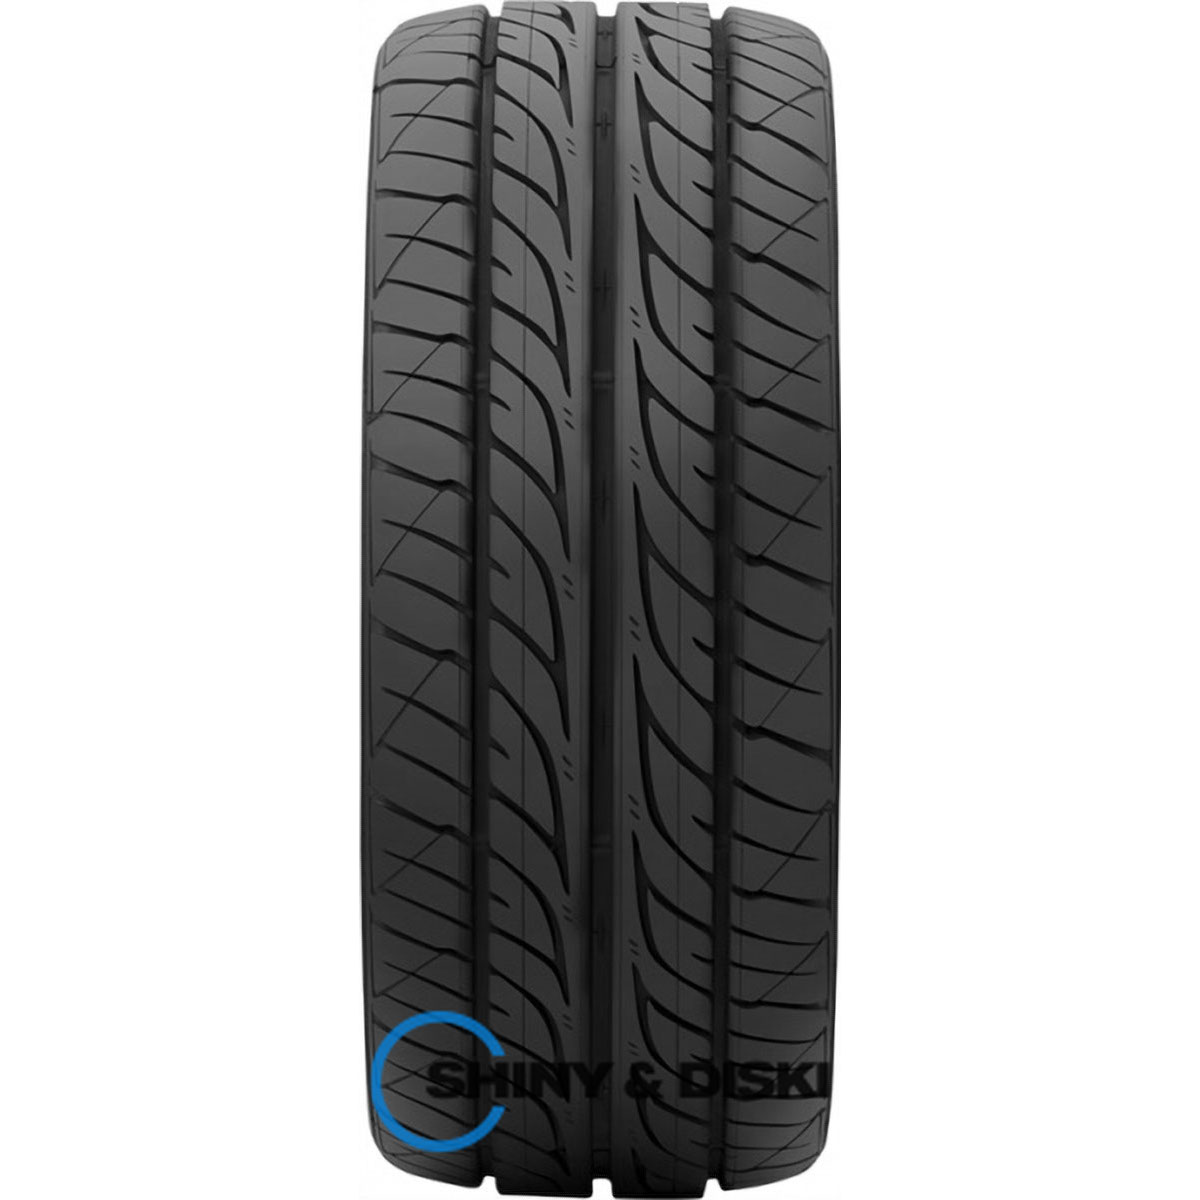 резина dunlop sp sport lm703 205/65 r16 95t